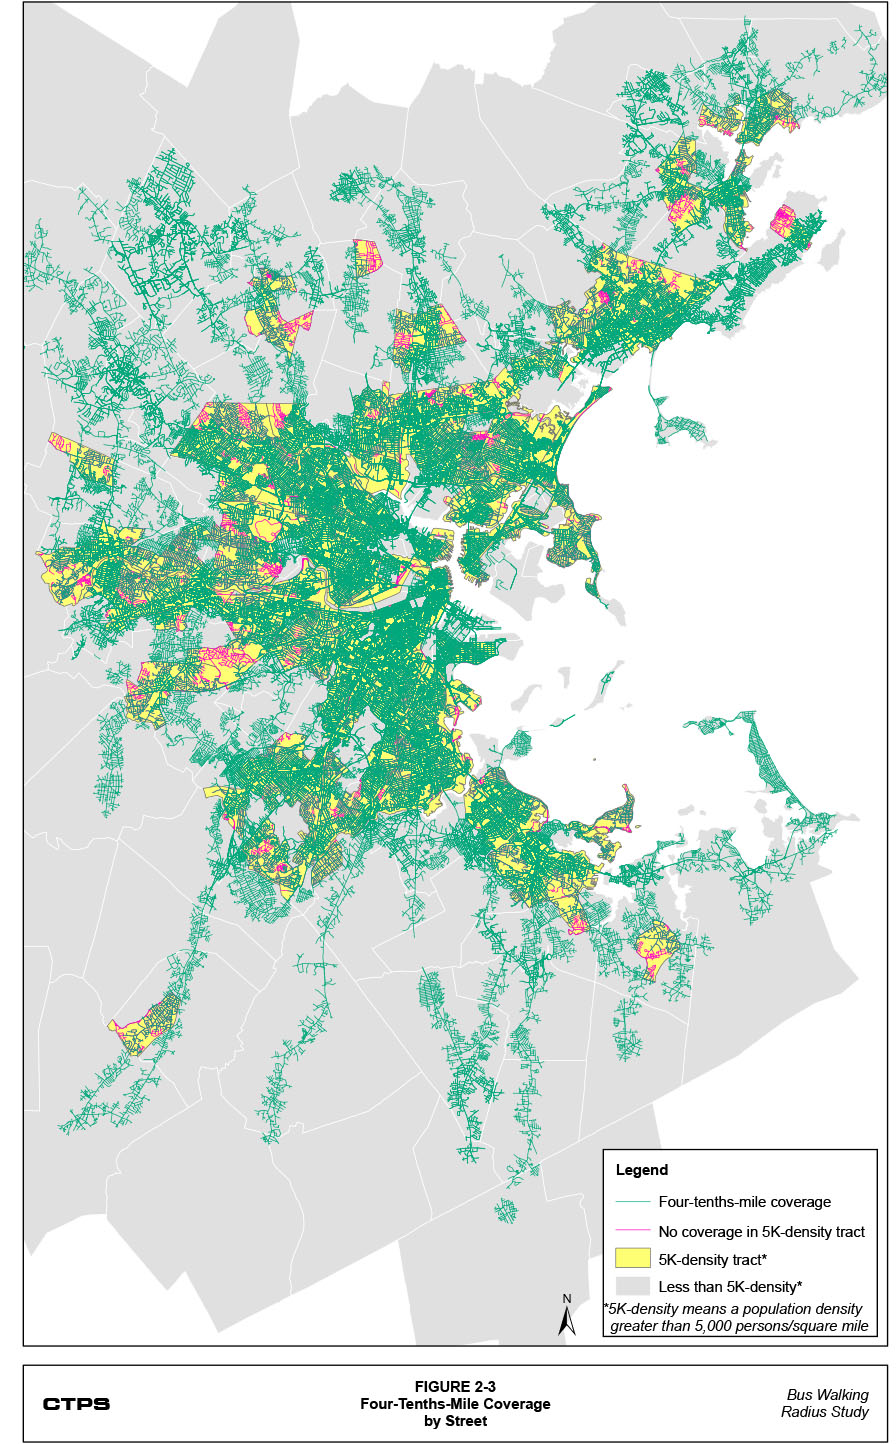 Figure 2-3: Four-Tenths-Mile Coverage by Street. This is a map that shows two categories of street miles: 1) the street miles in the four-tenths-mile coverage for the entire MBTA bus and rapid transit systems; and 2) the street miles within census tracts with a population density greater than 5,000 persons per square mile. The map also shows where these two categories of street miles do and do not overlap.